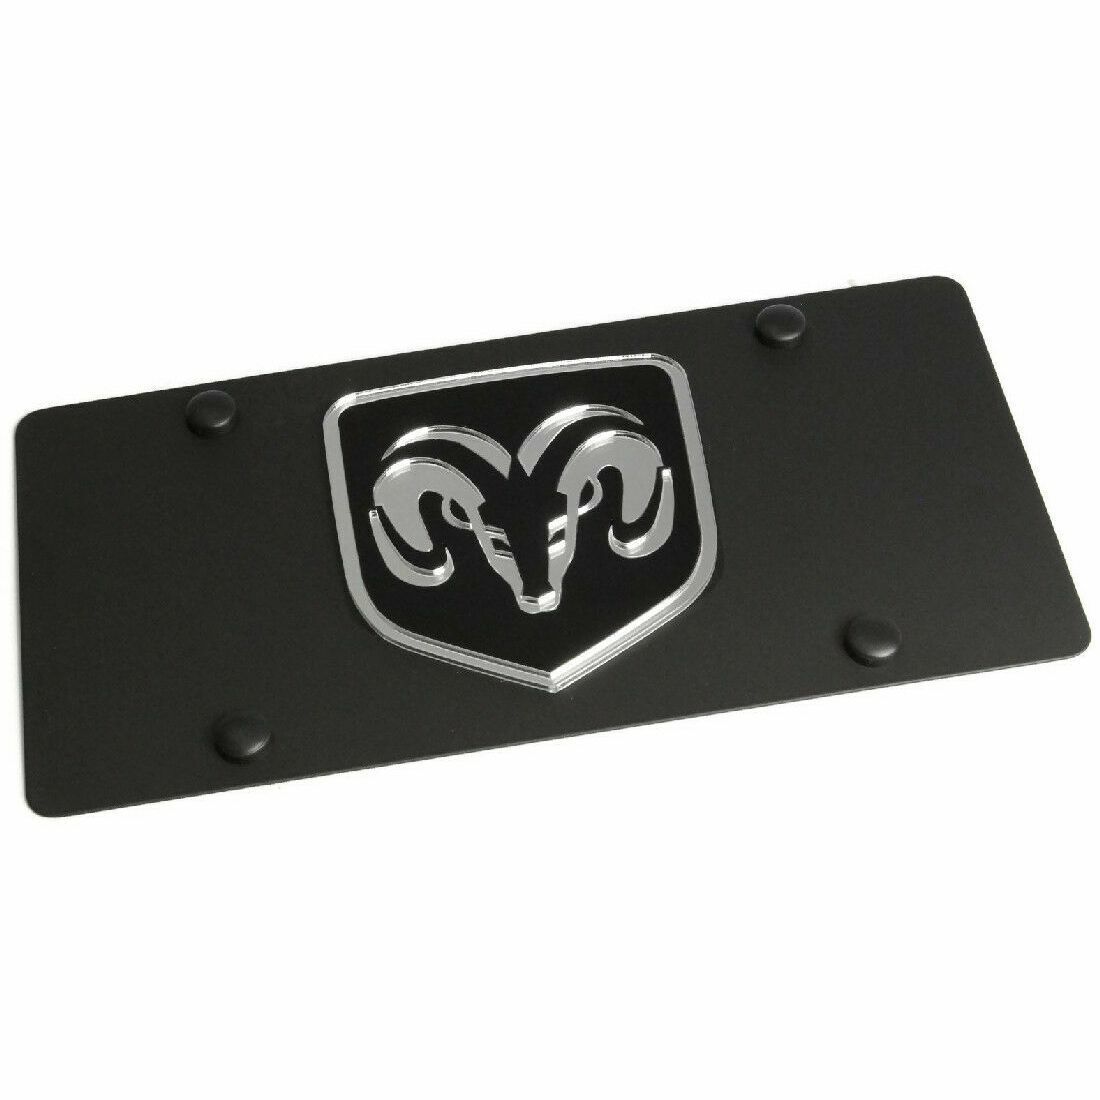 Stainless Steel Black Boxed Ram License Plate Frame 3D Novelty Tag